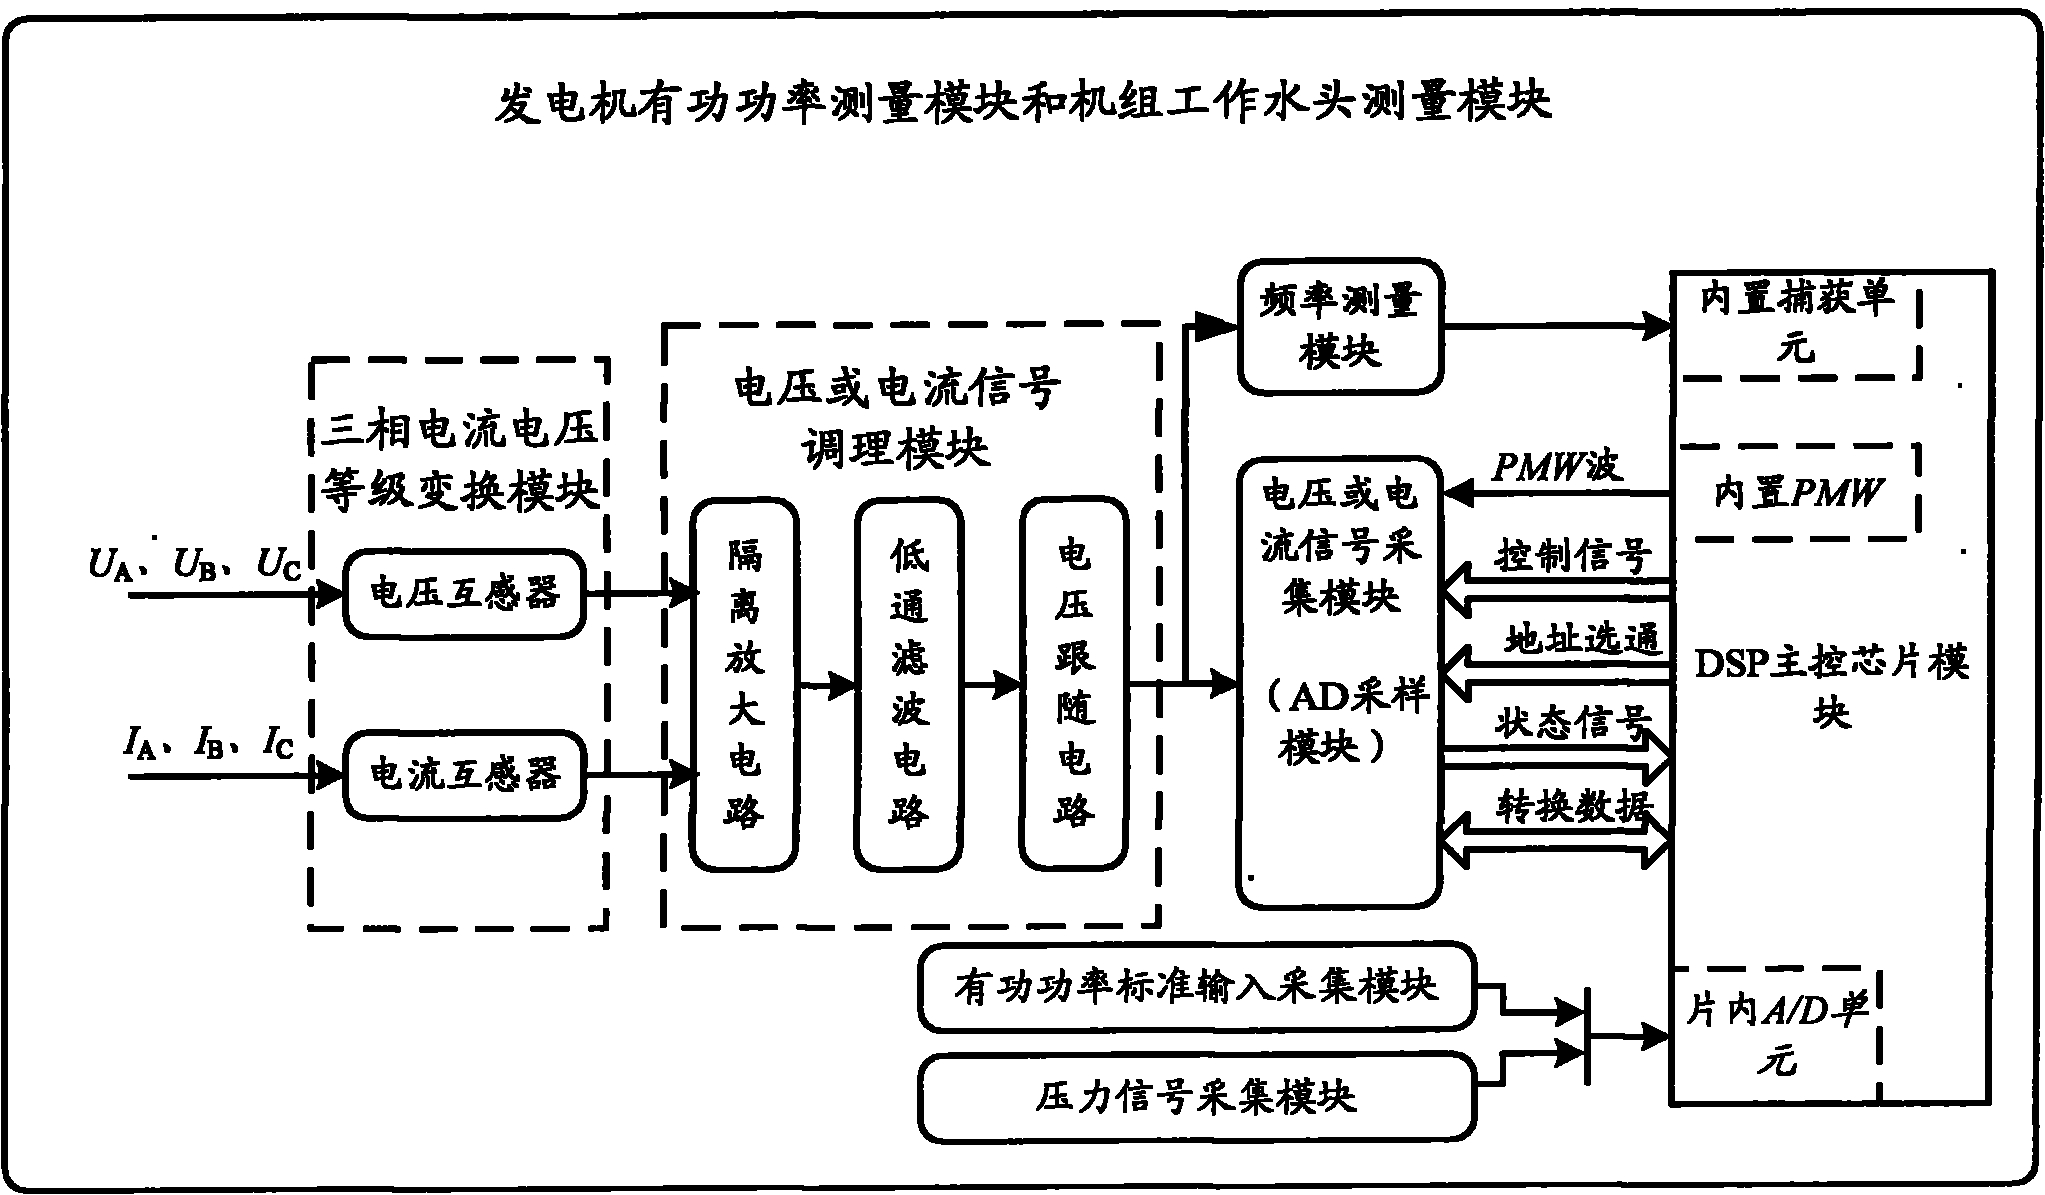 Device, system and method for monitoring efficiency of hydro-electric generating set